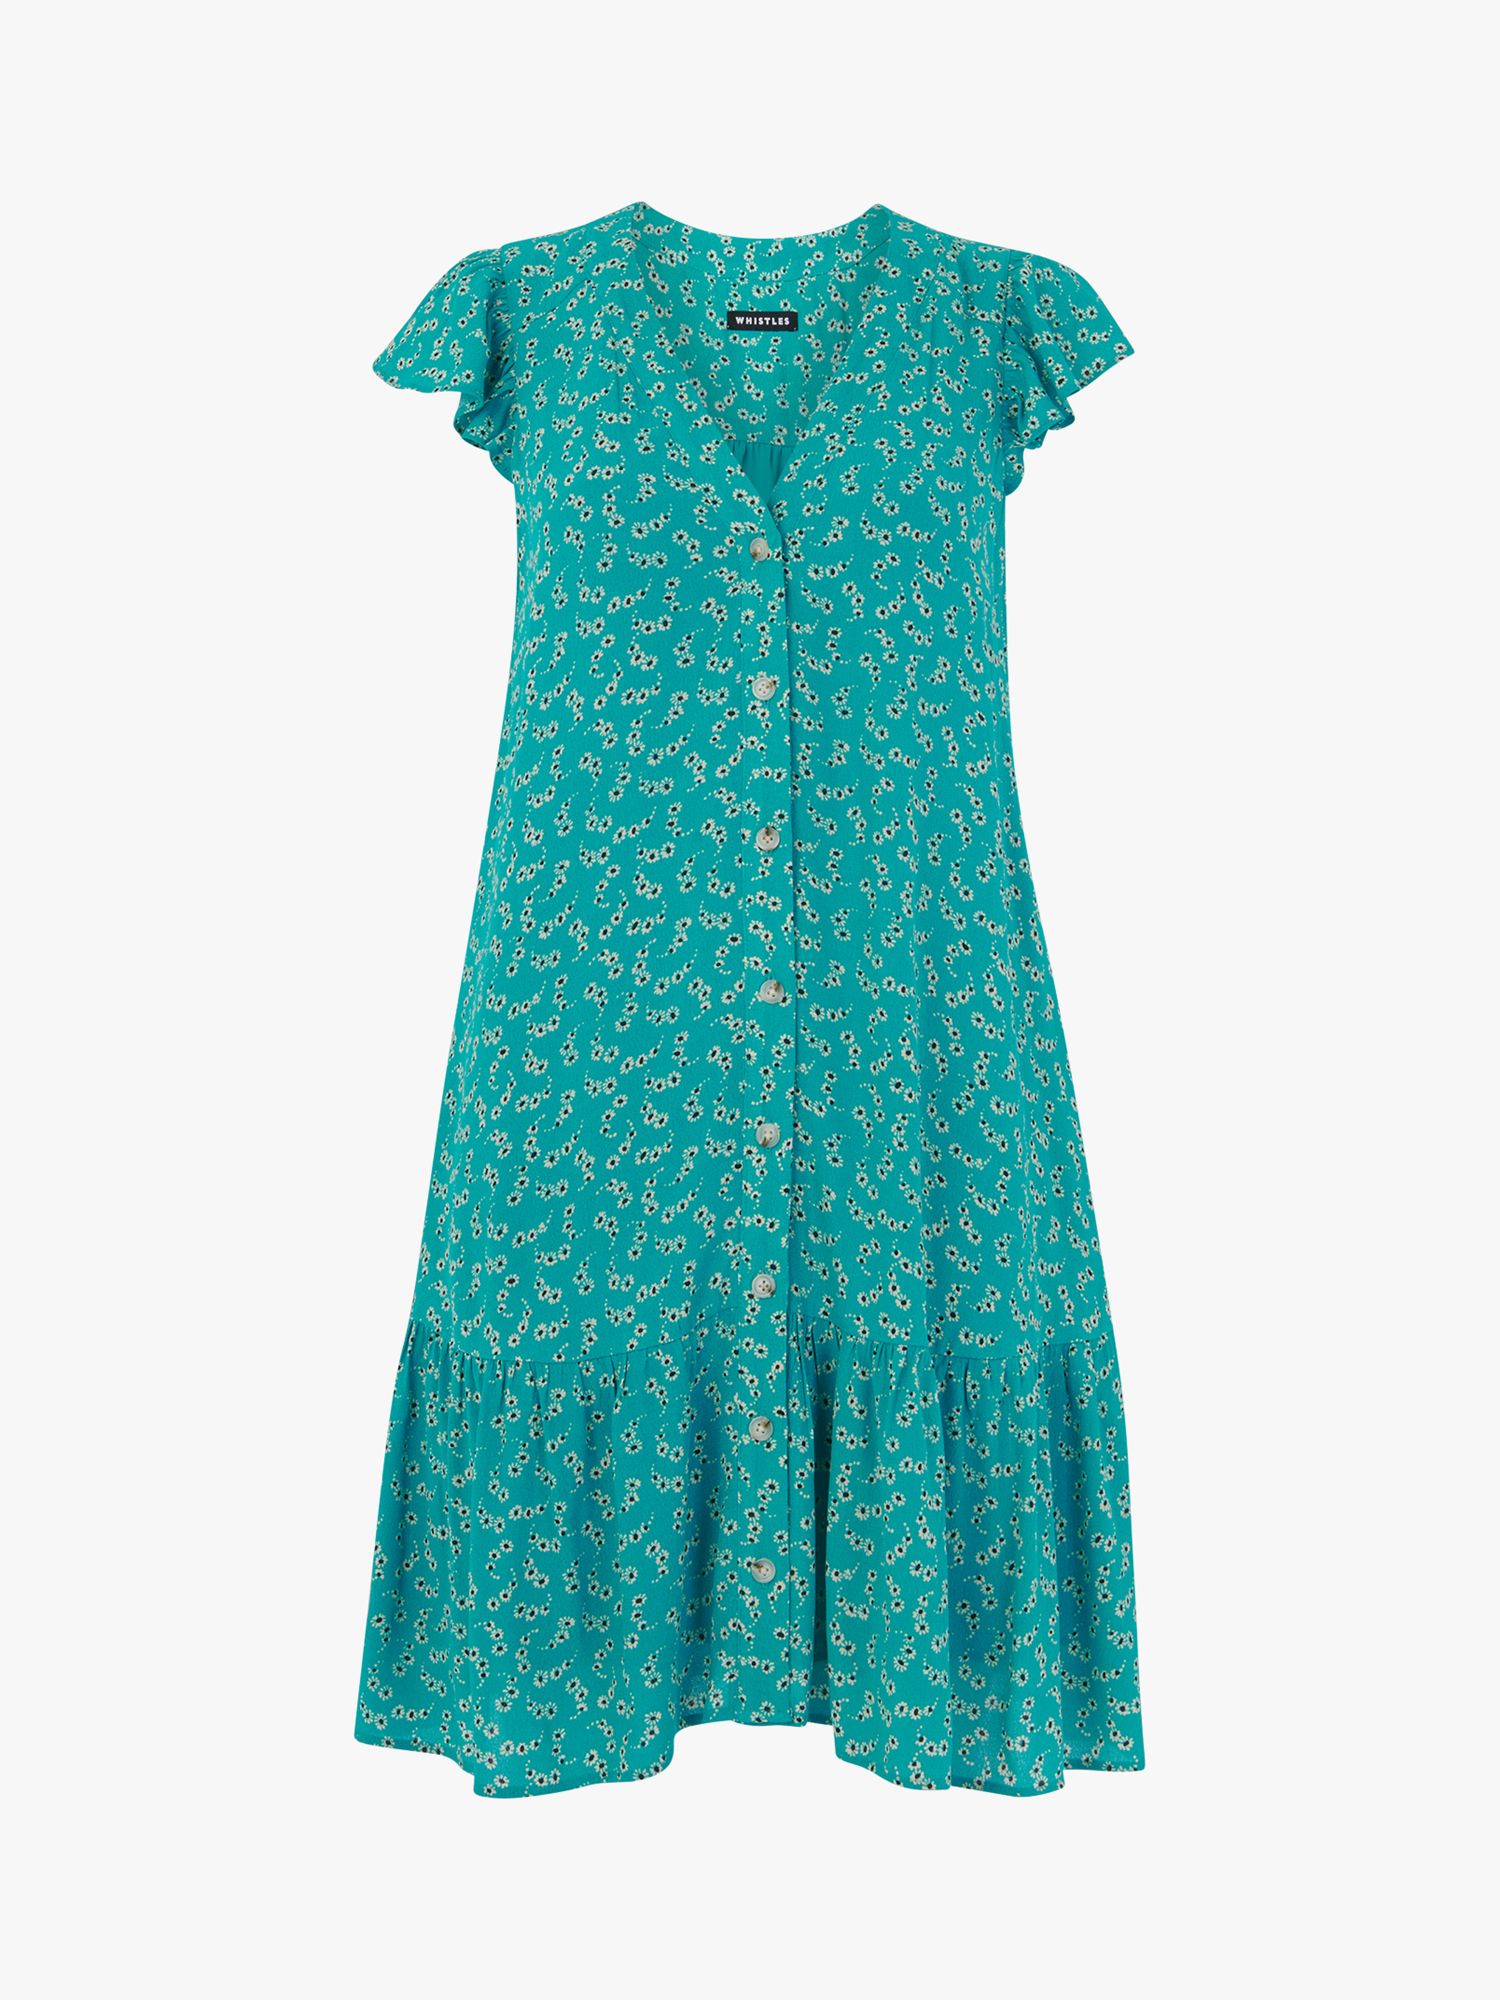 Whistles Floral Crescent Flippy Dress, Green, 6